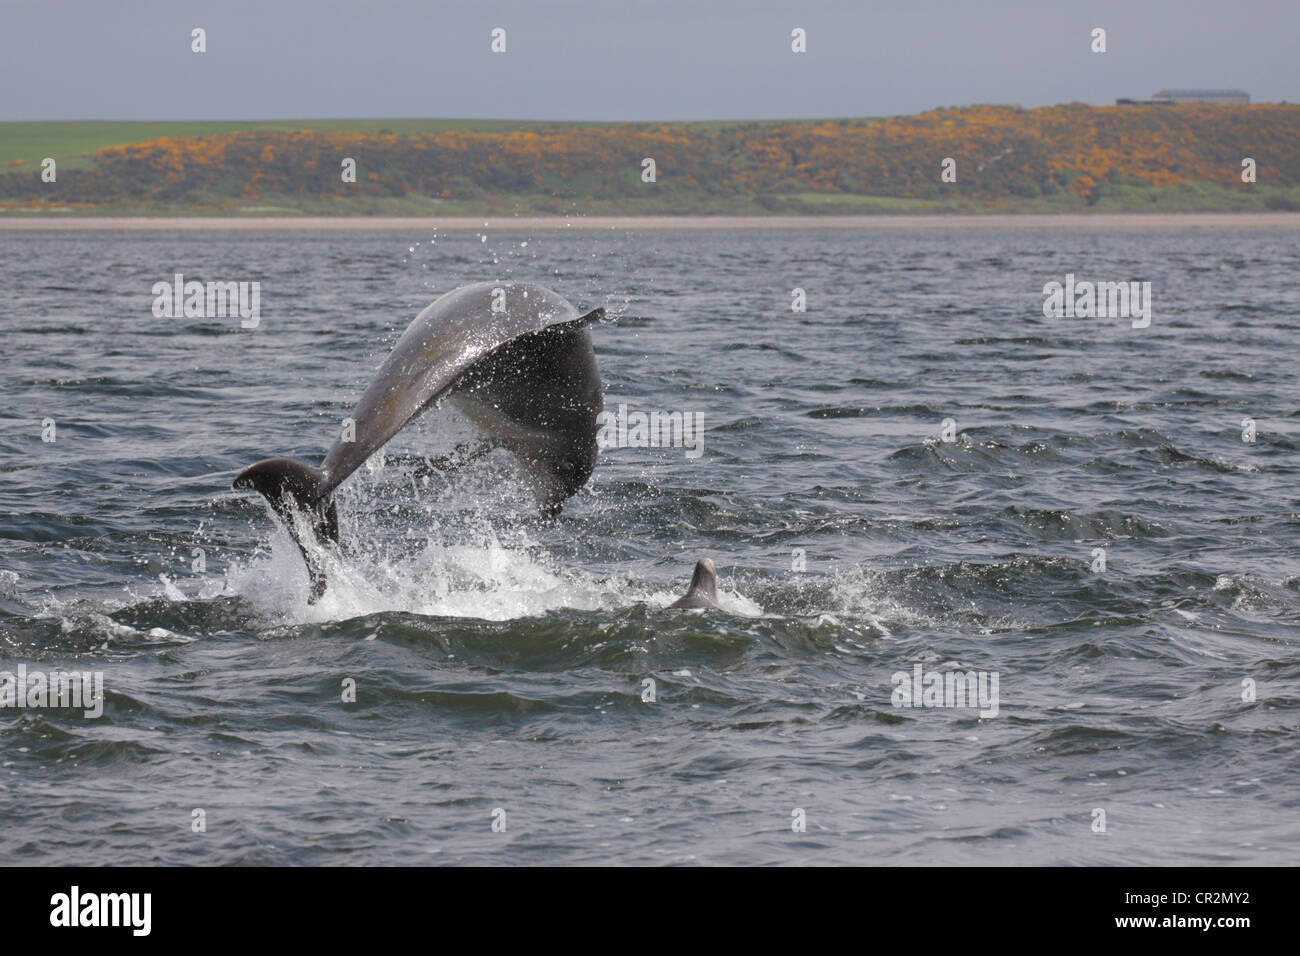 Bottlenose Dolphins (Tursiops truncatus) leaping, breaching in the Moray Firth, Chanonry Point, Scotland, UK Stock Photo